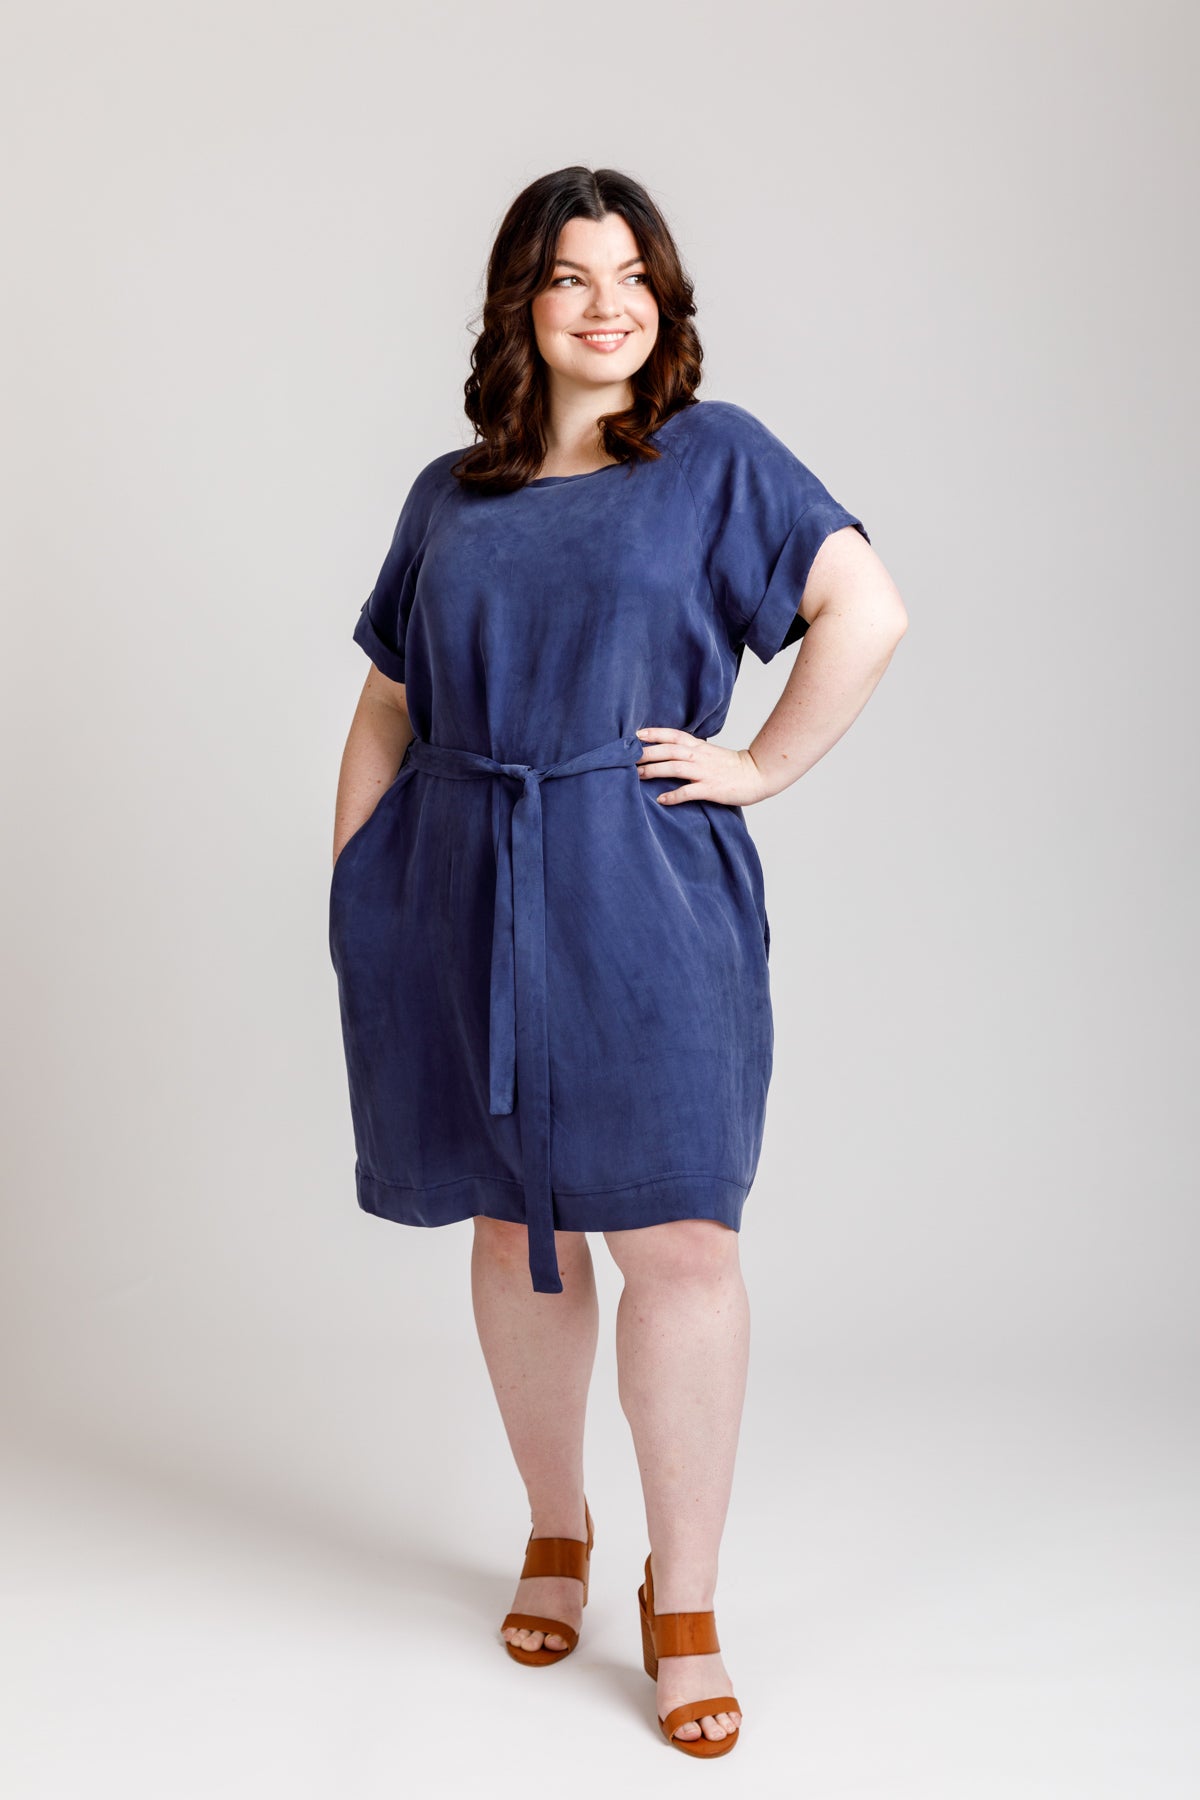 River Curve Dress & Top Sewing Pattern